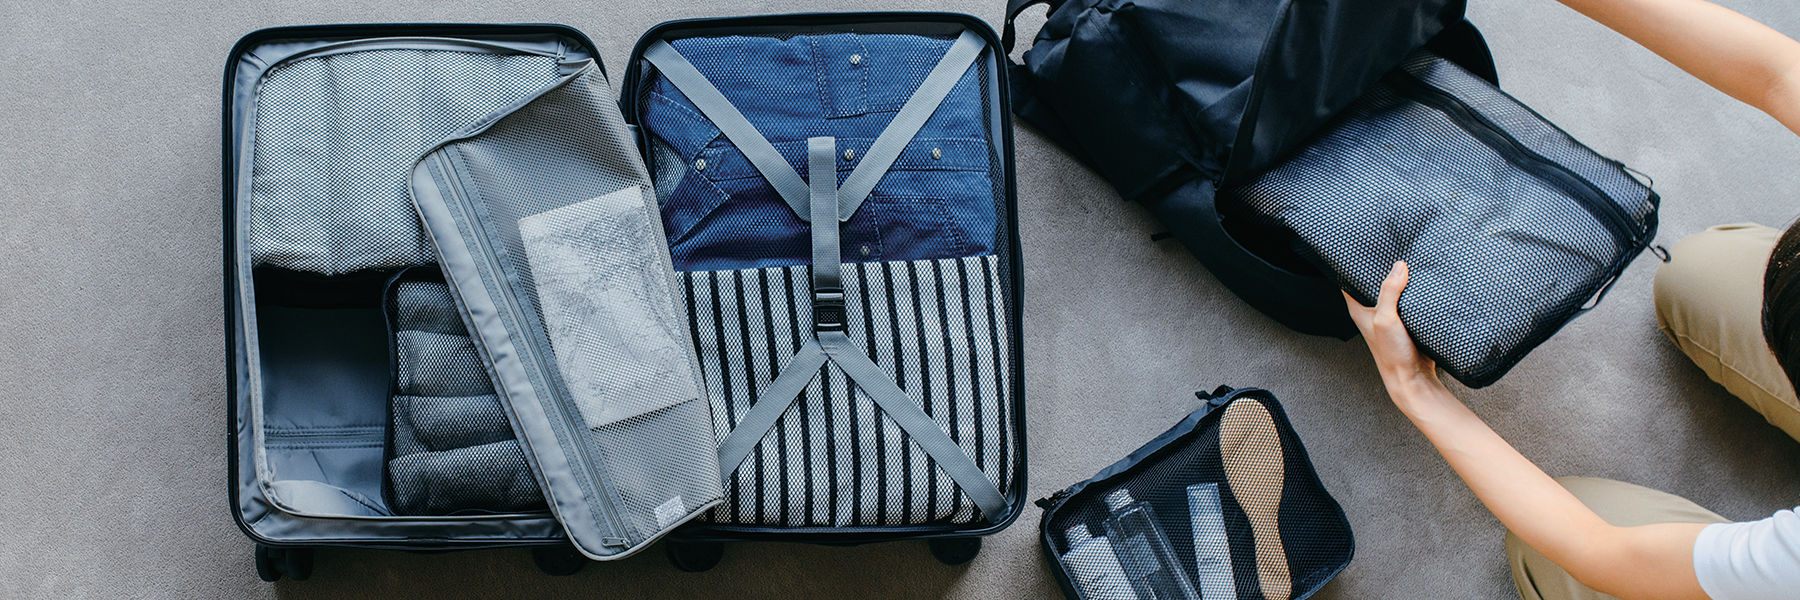 MUJI hardshell luggage and accessories for the seasoned traveller